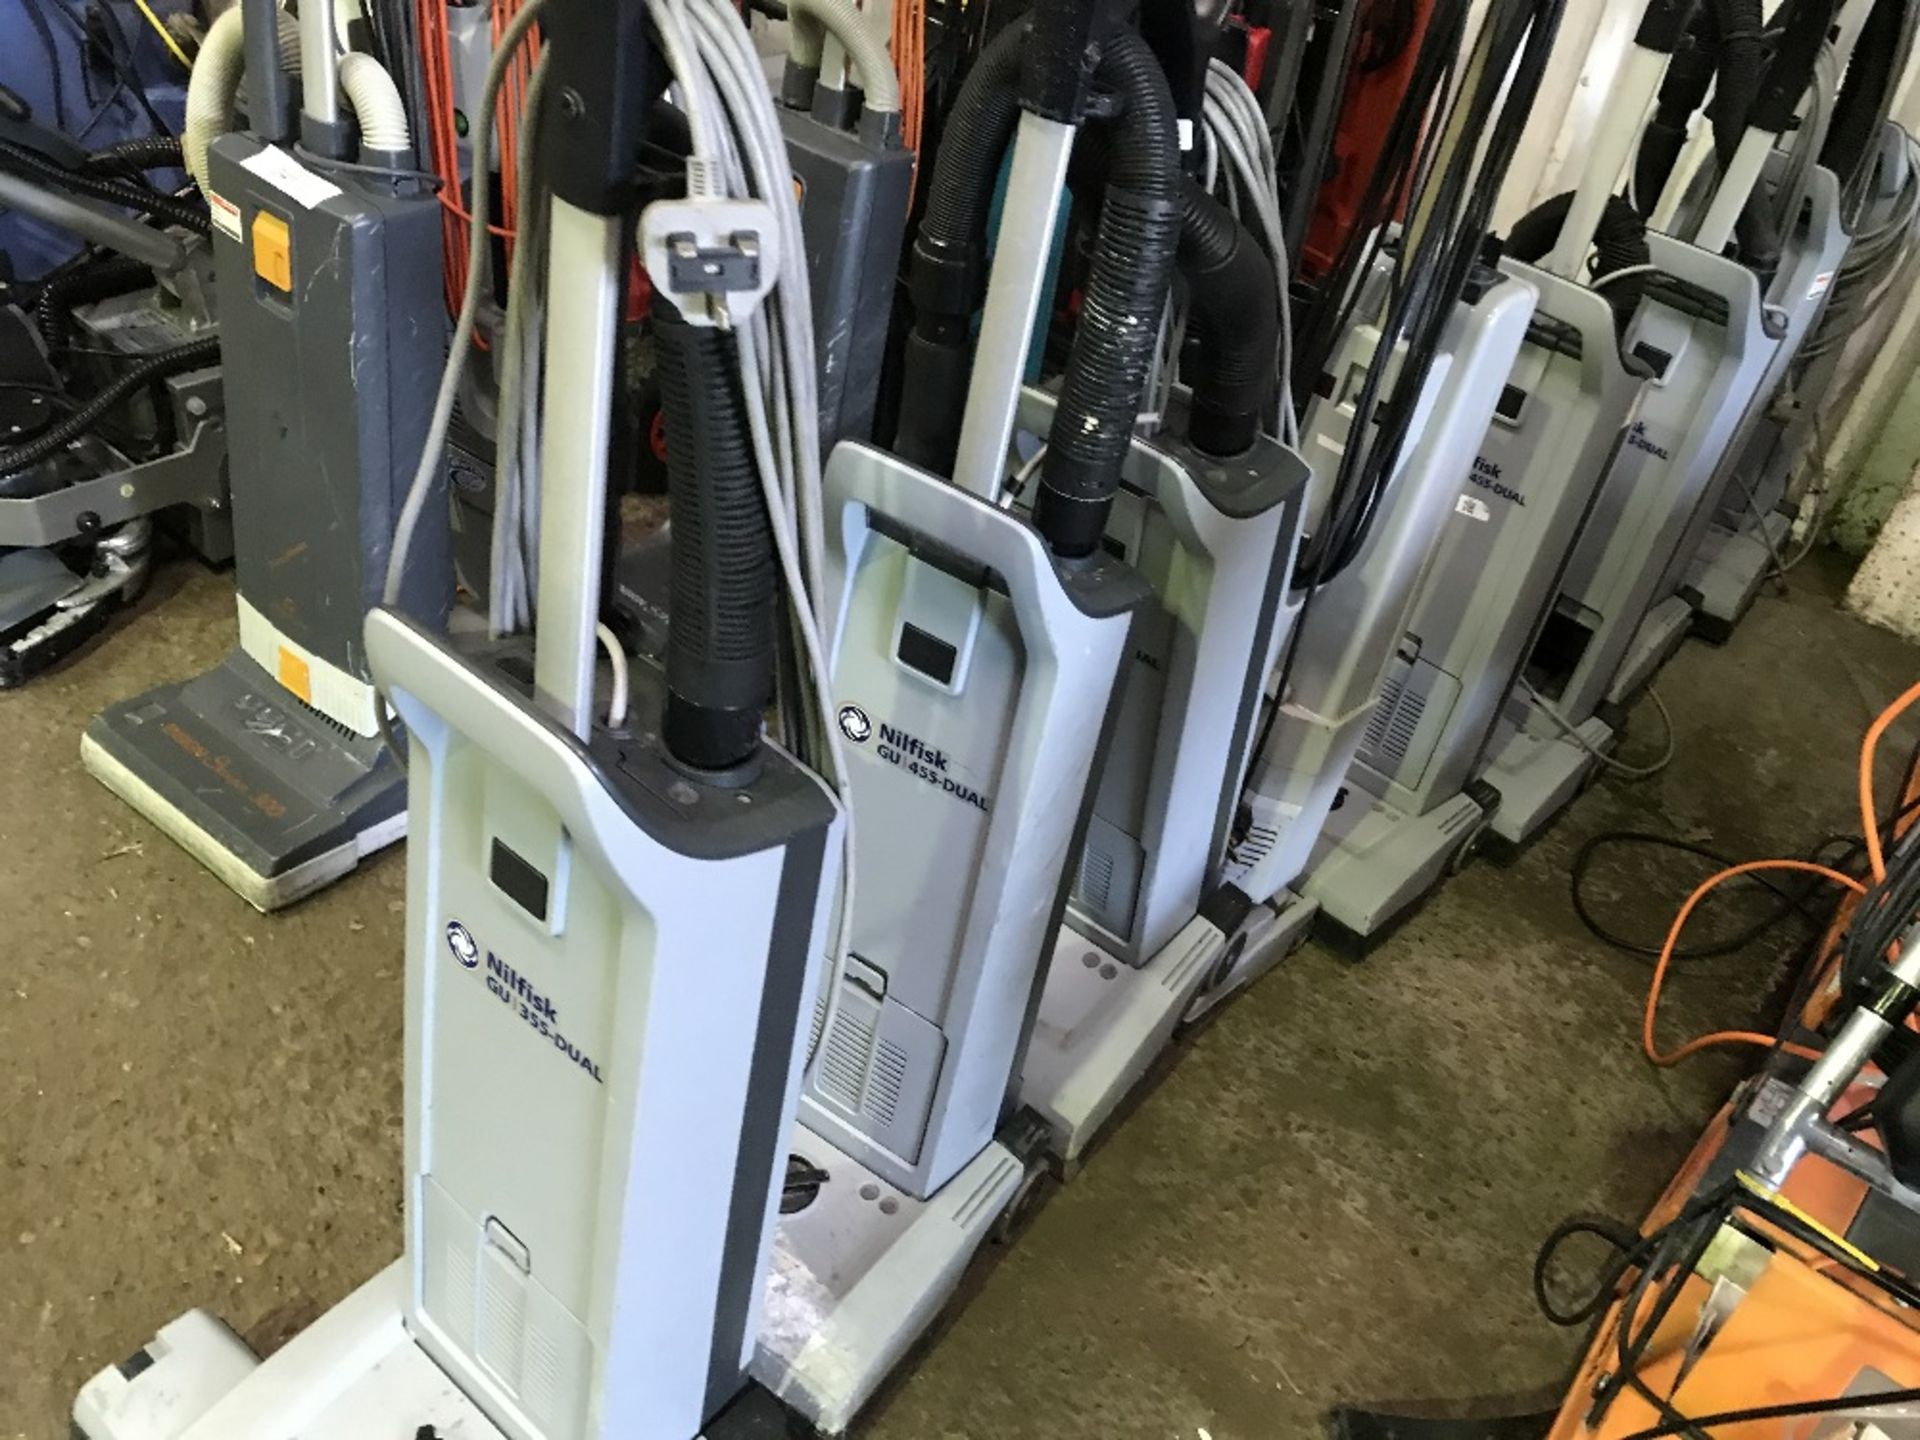 8 X NILFISK VACUUM CLEANERS...SOURCED FROM LARGE CONTRACT CLEANING COMPANY.....THIS ITEM MAY BE - Image 2 of 3